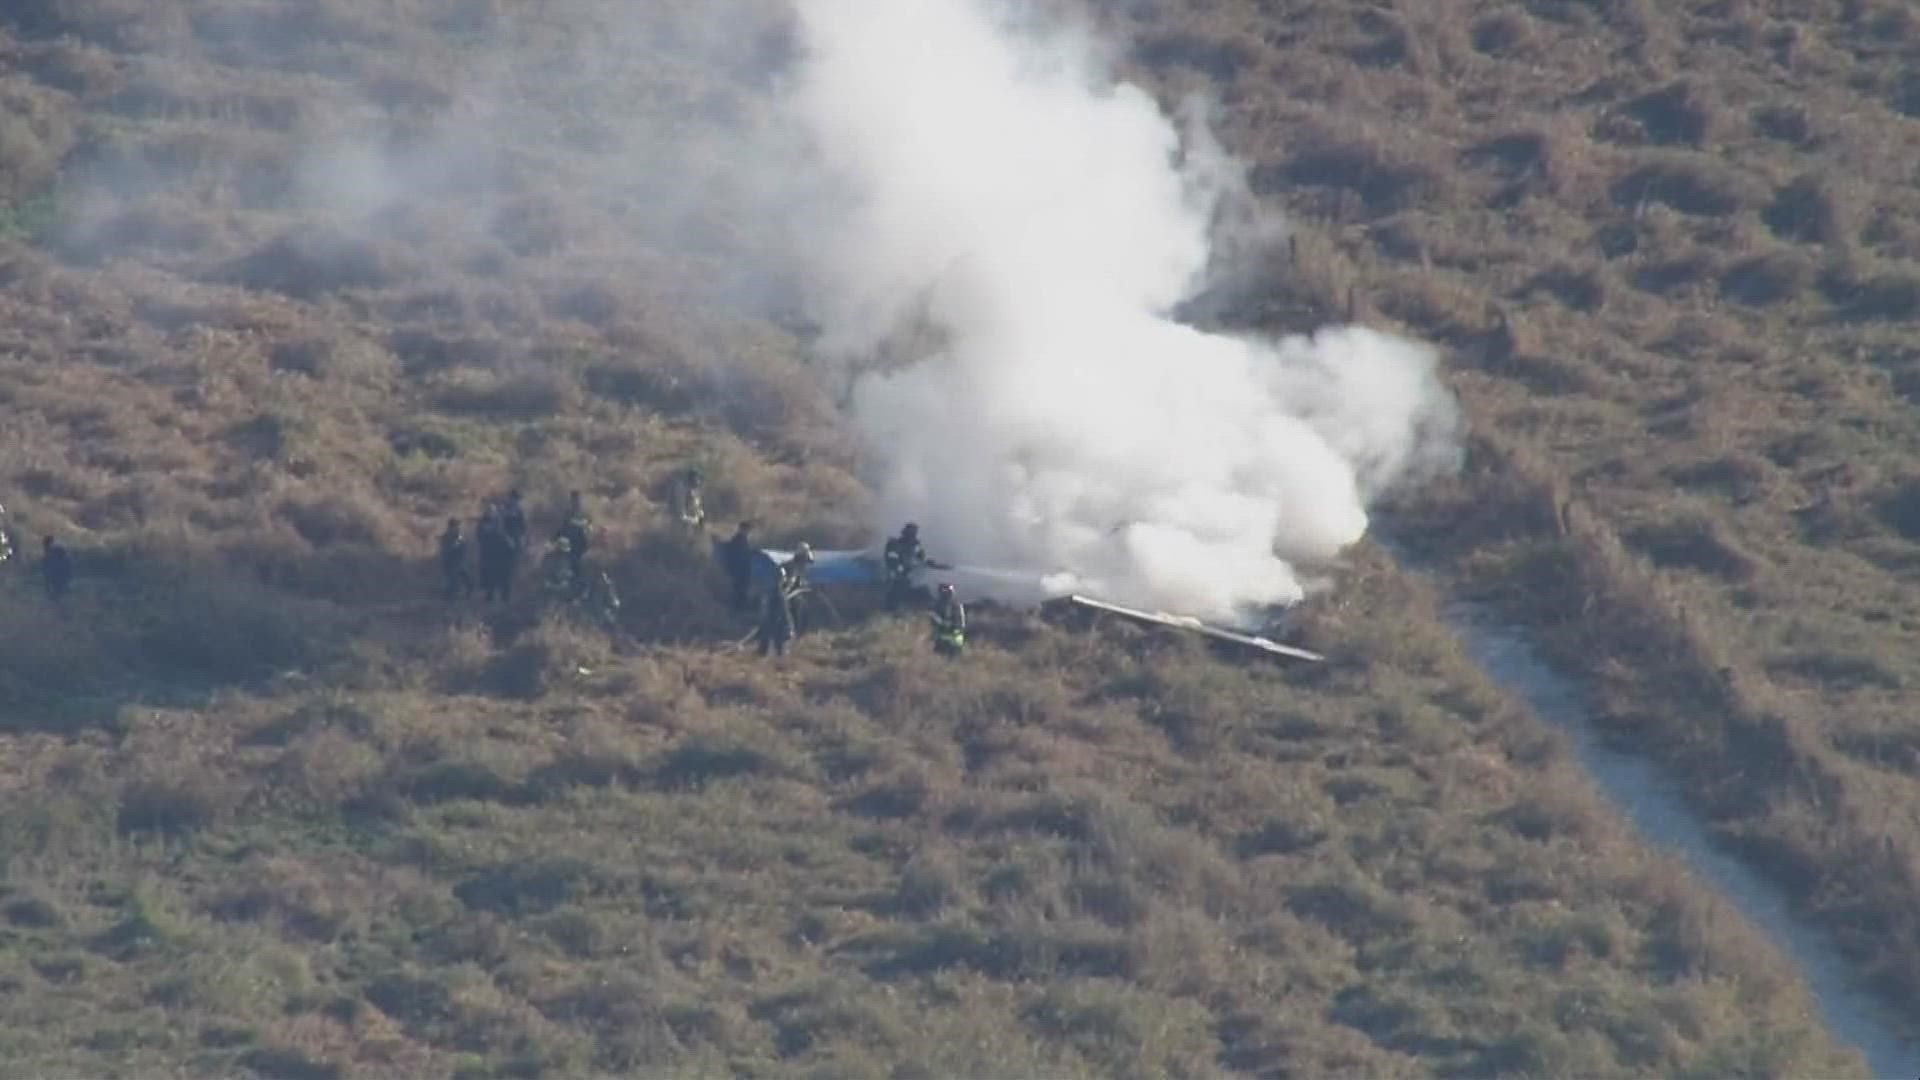 The plane was carrying four people, all of whom were killed in the crash on Nov. 18.